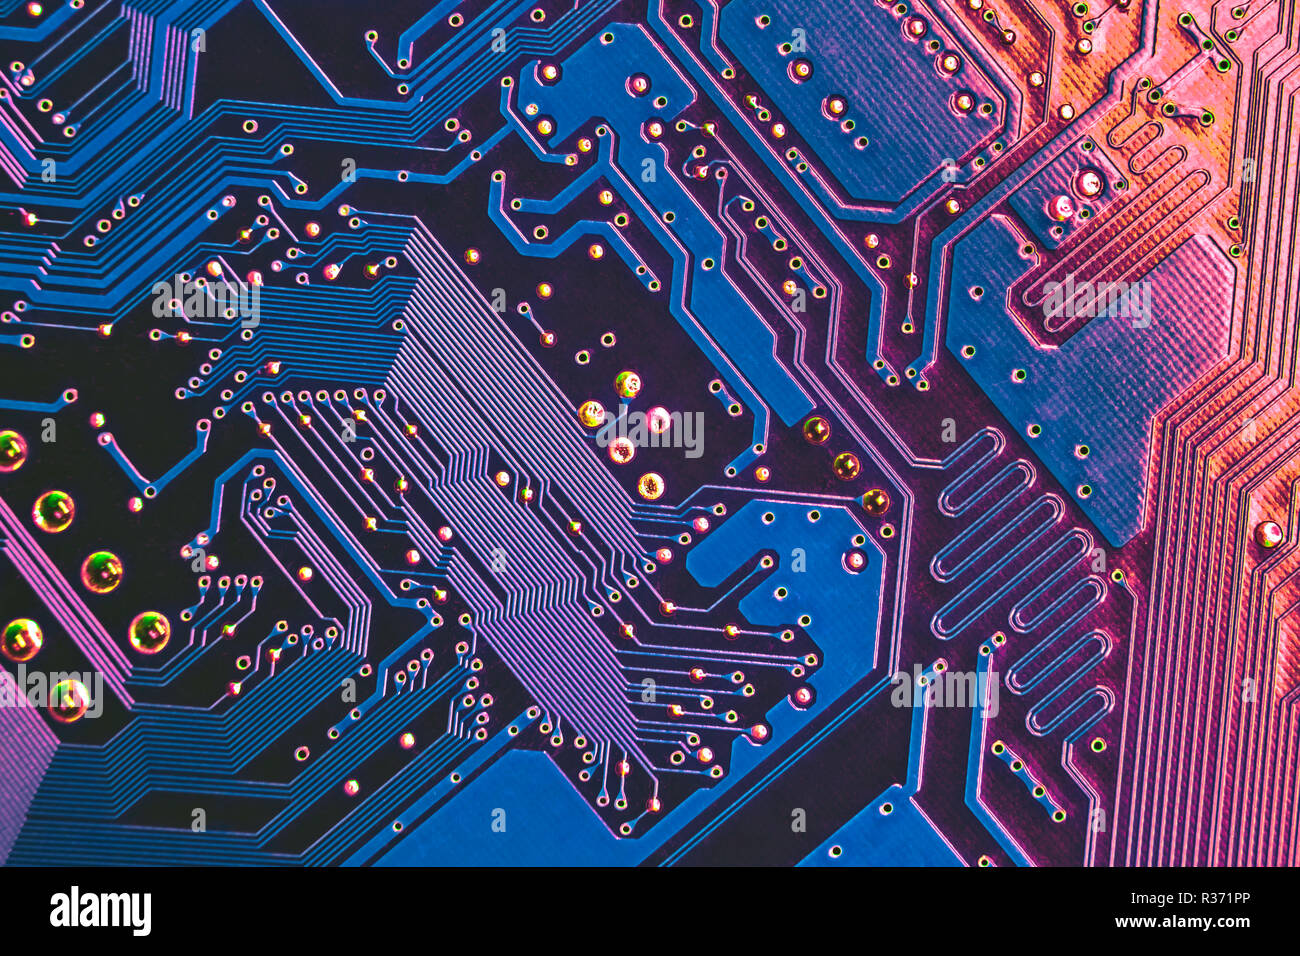 Background image texture of Motherboard digital microchips Stock Photo